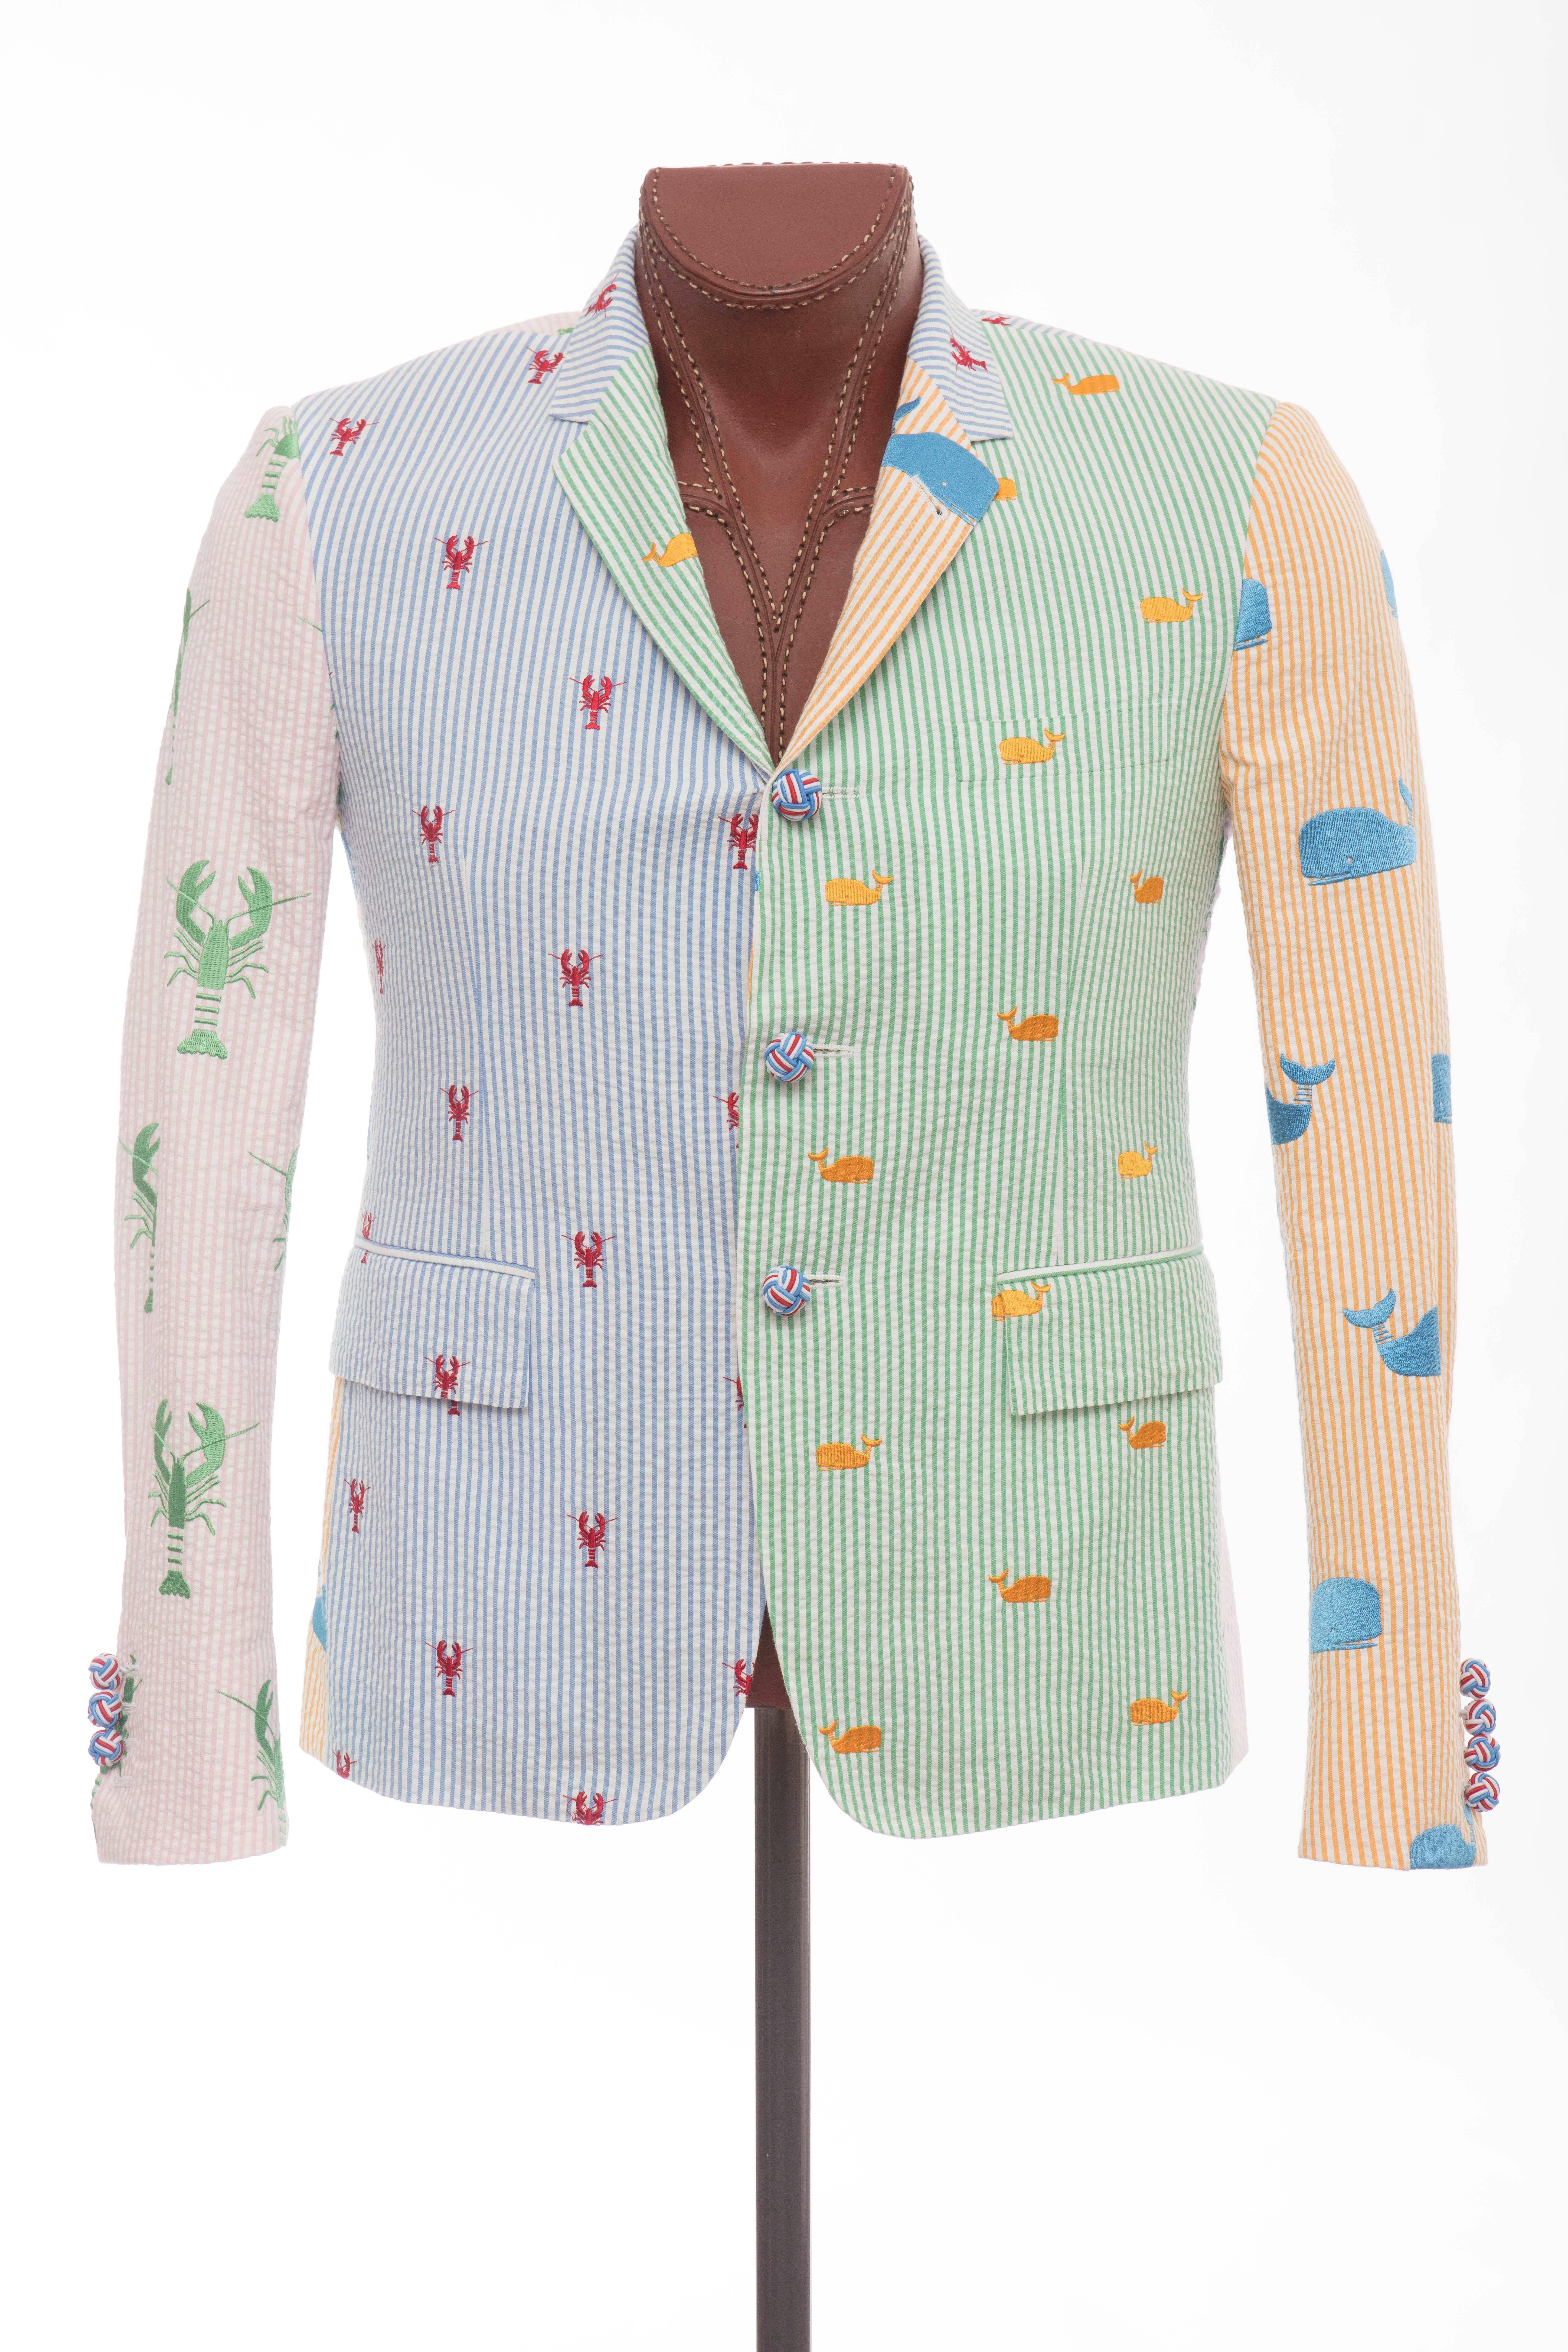 Thom Browne, Spring 2013 blue, green, tangerine and pink seersucker blazer with whale and lobster embroidery throughout, notched lapels, three front pockets, three interior welt pockets, two back hem vents and front button closures. 

Designer